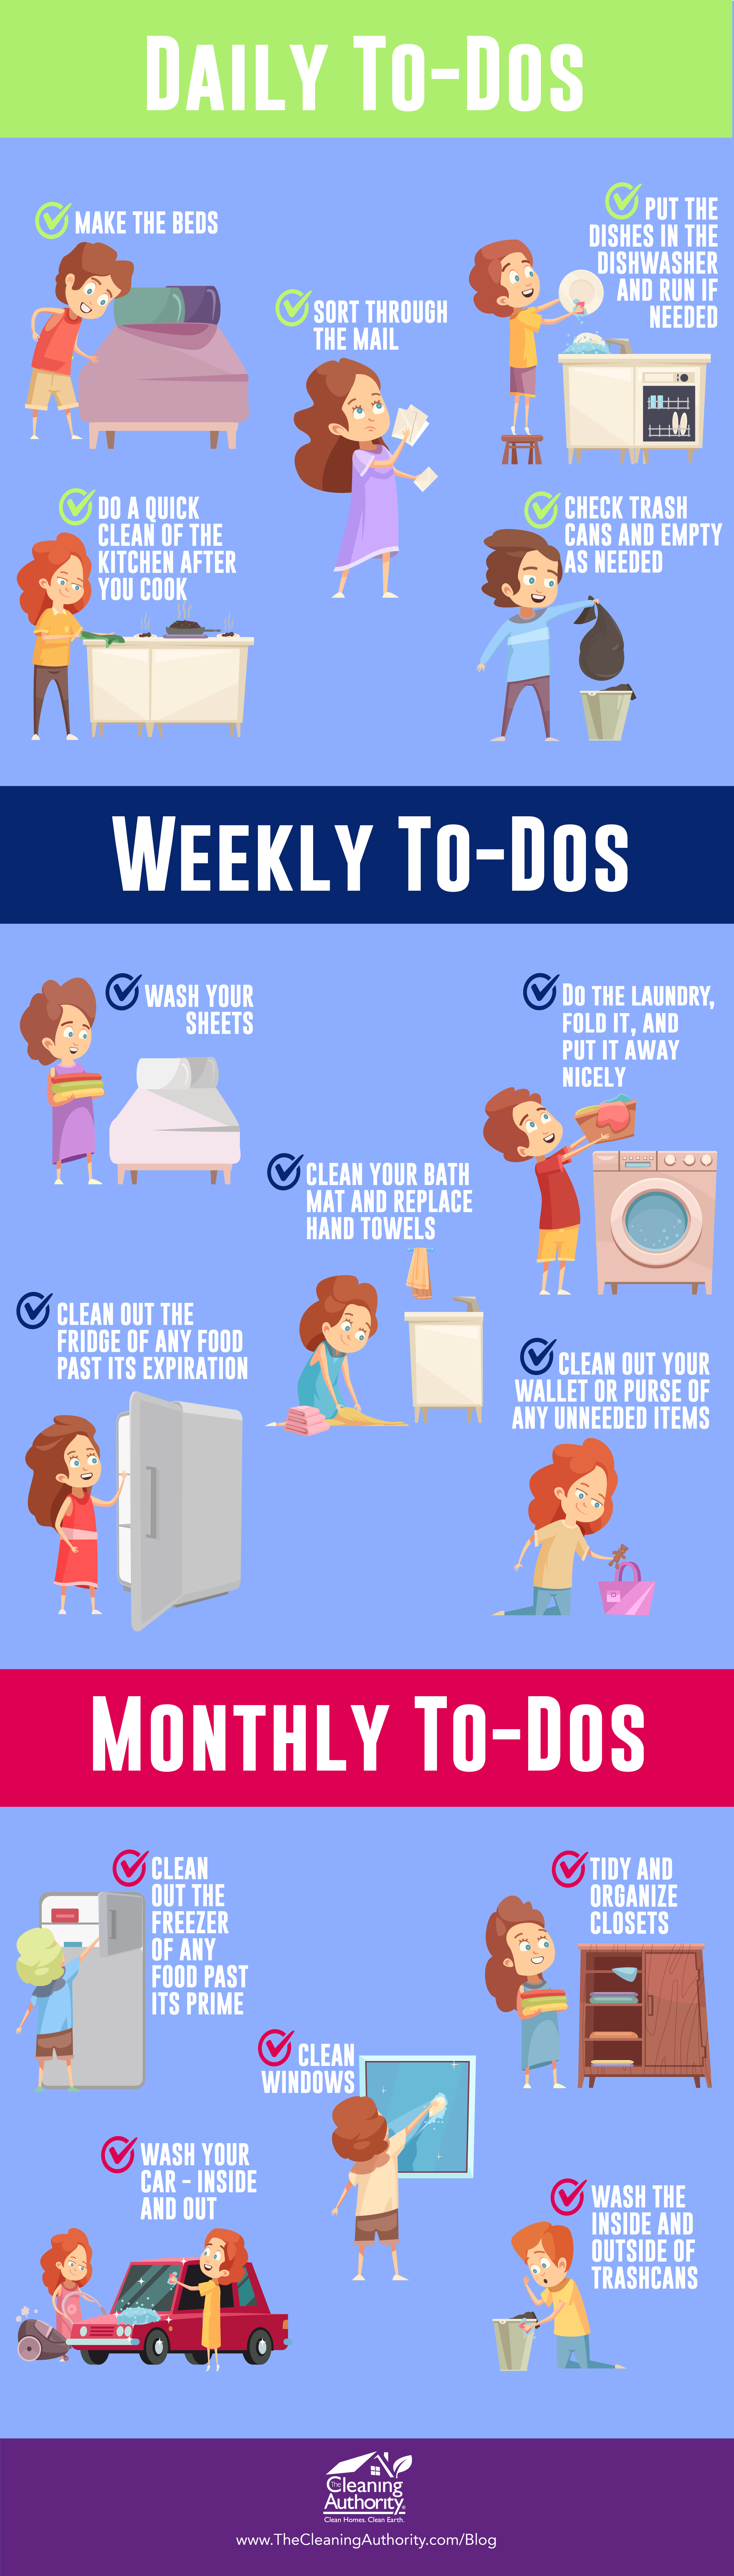 Cleaning Into Daily, Weekly, and Monthly To-Dos infographic